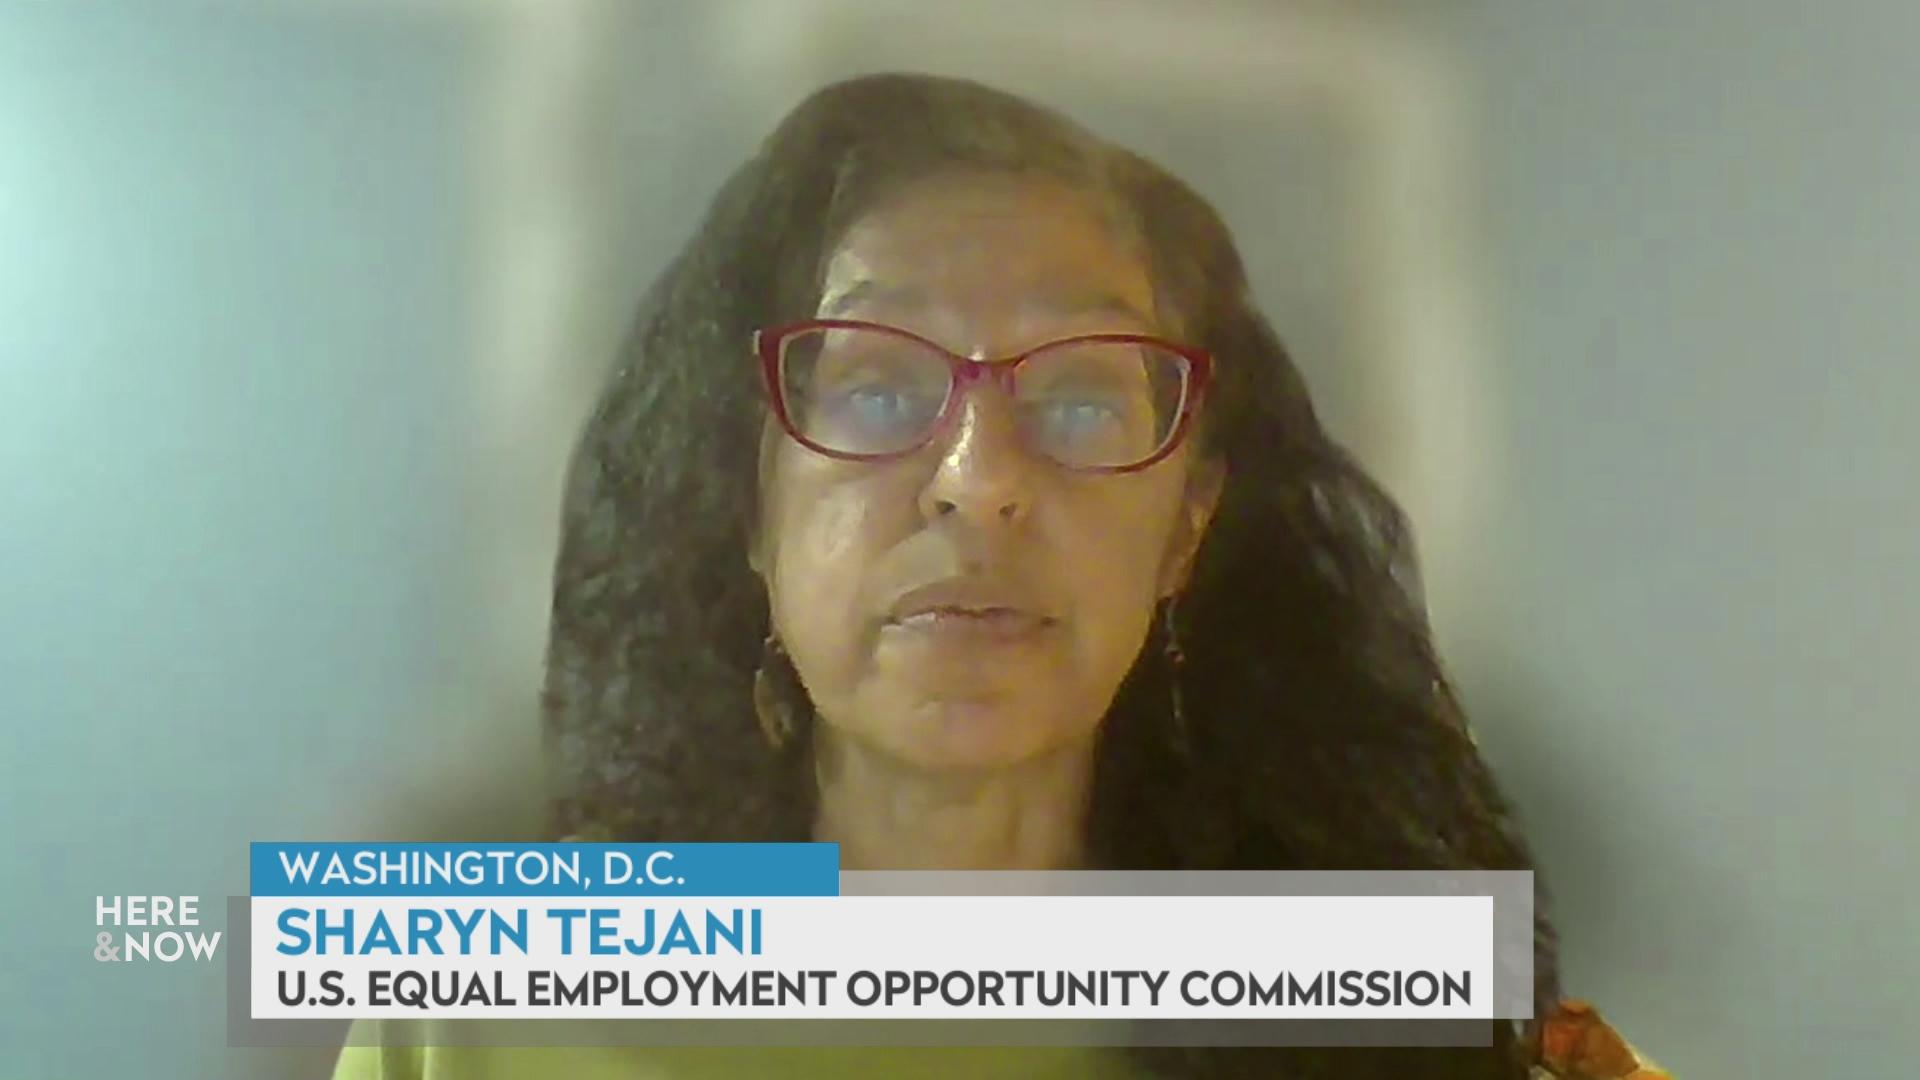 A still image from a video shows Sharyn Tejani in front of a dark, blurred screen with a graphic at bottom reading 'Washington, D.C.' 'Sharyn Tejani' and 'U.S. Equal Employment Opportunity Commission.'